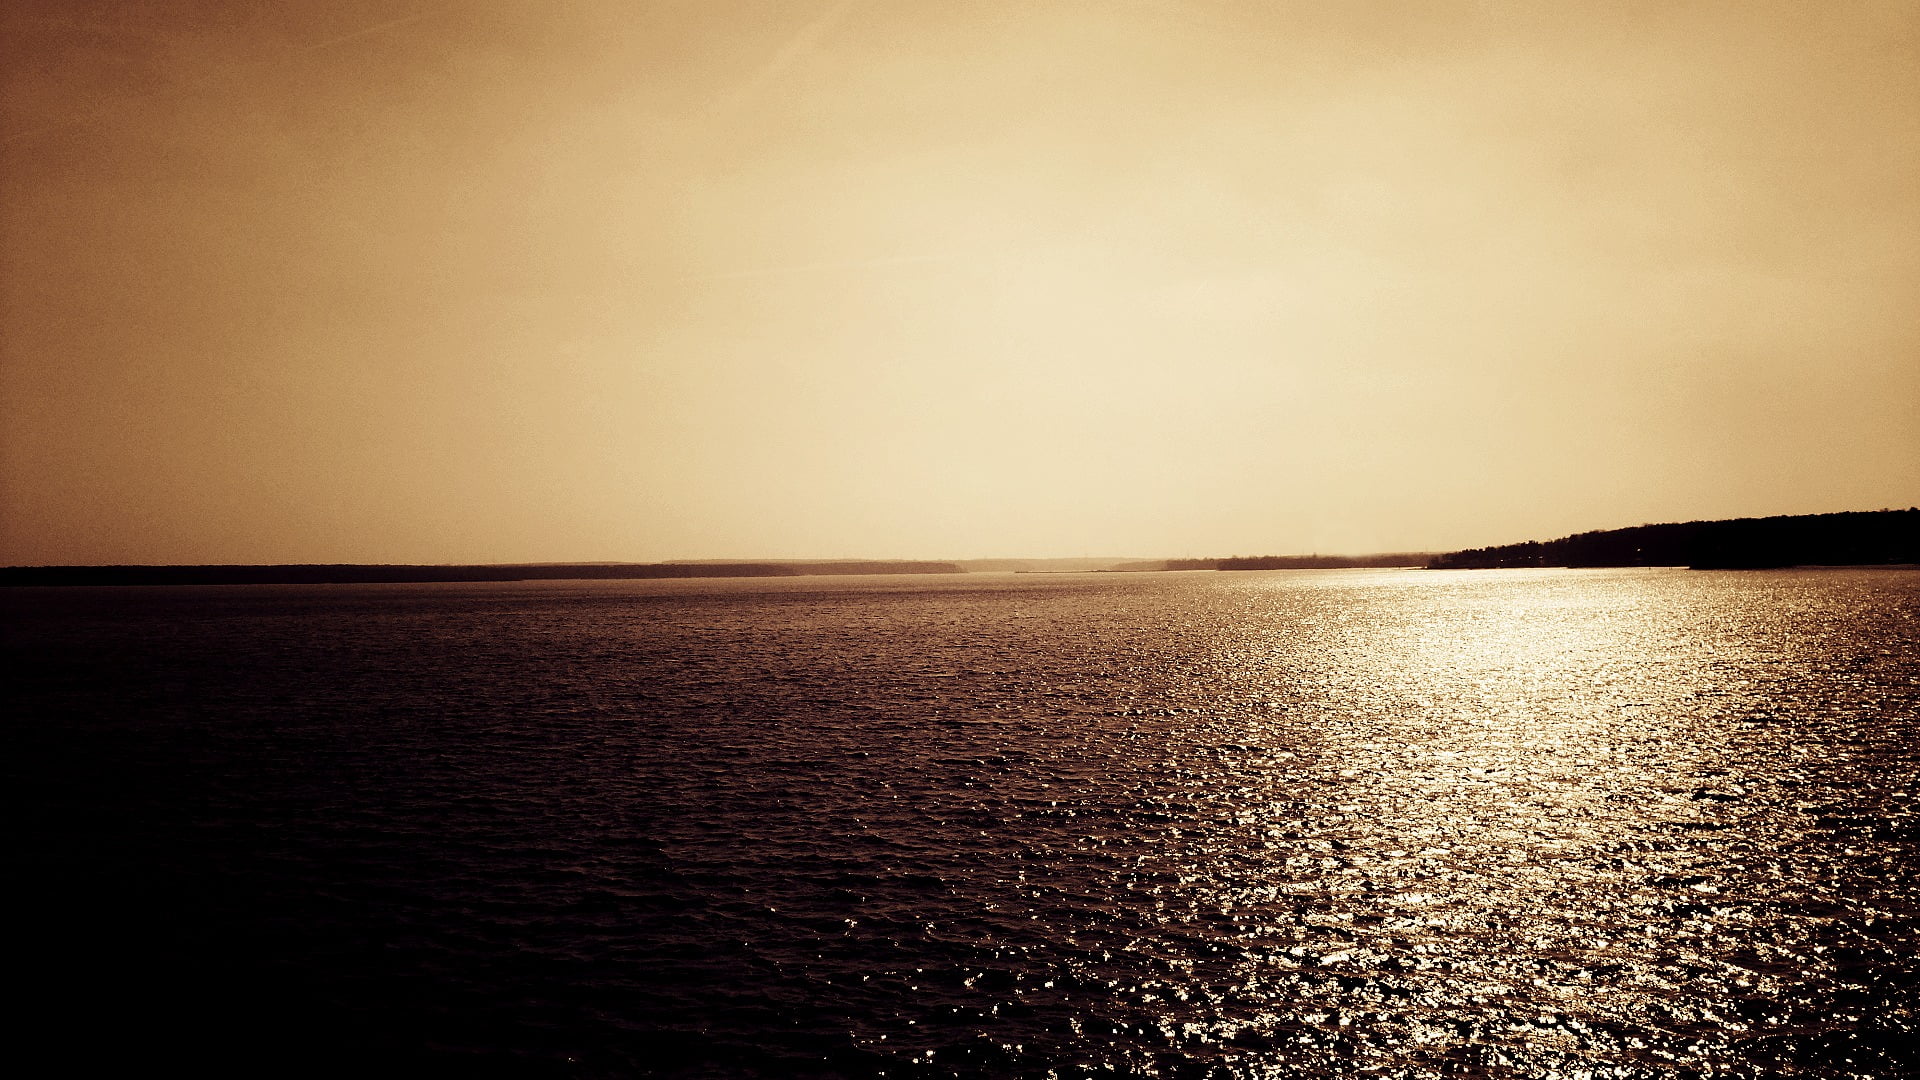 sea and island, sepia, nature, sky, water, scenics - nature, tranquility